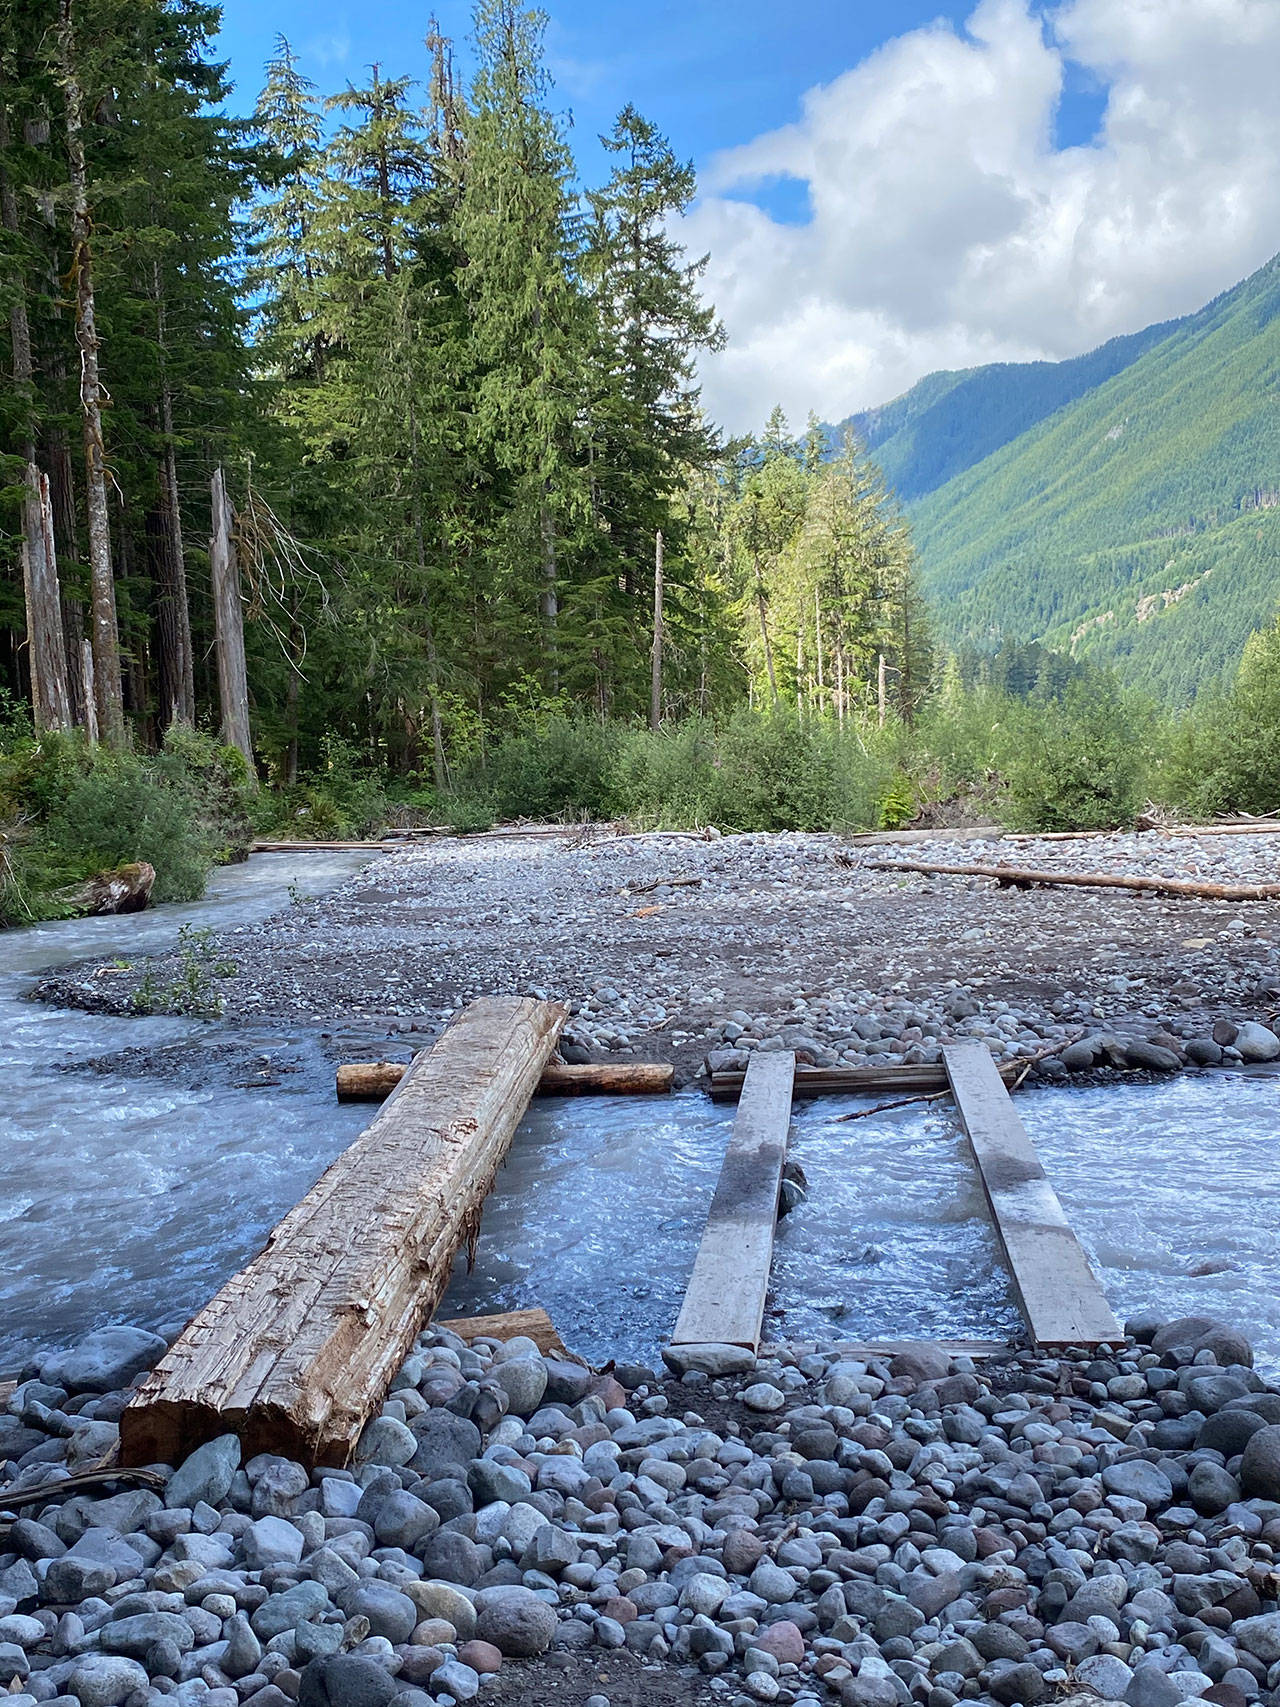 Be careful: getting across a fast-moving stretch of the Carbon River requires sure footing and a sense of balance. Photo by Kevin Hanson